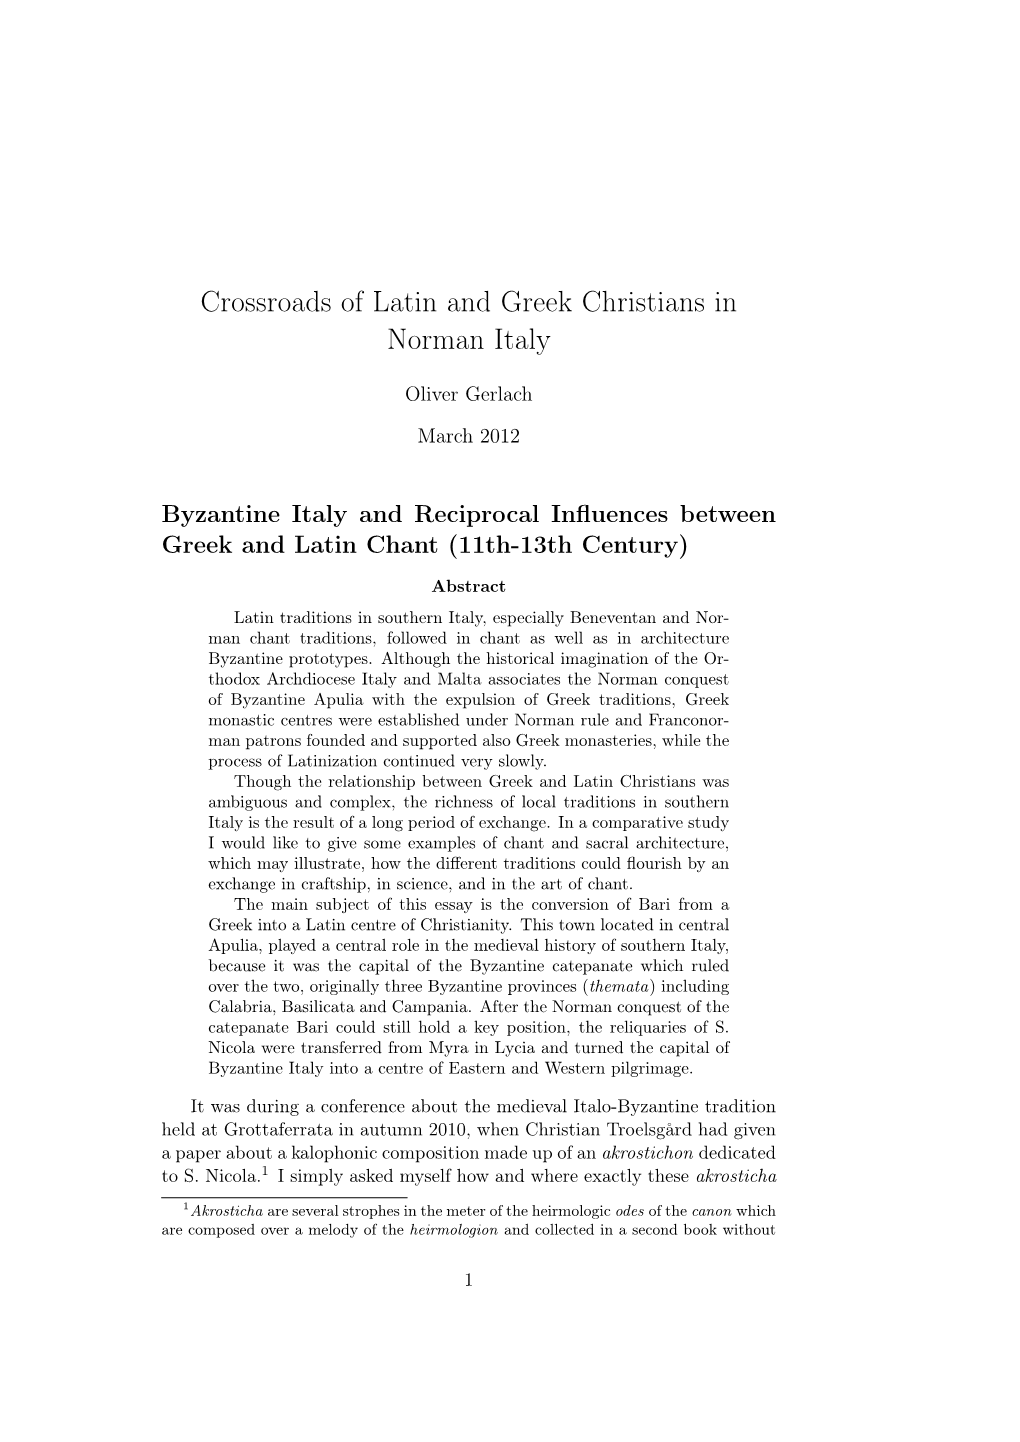 Crossroads of Latin and Greek Christians in Norman Italy